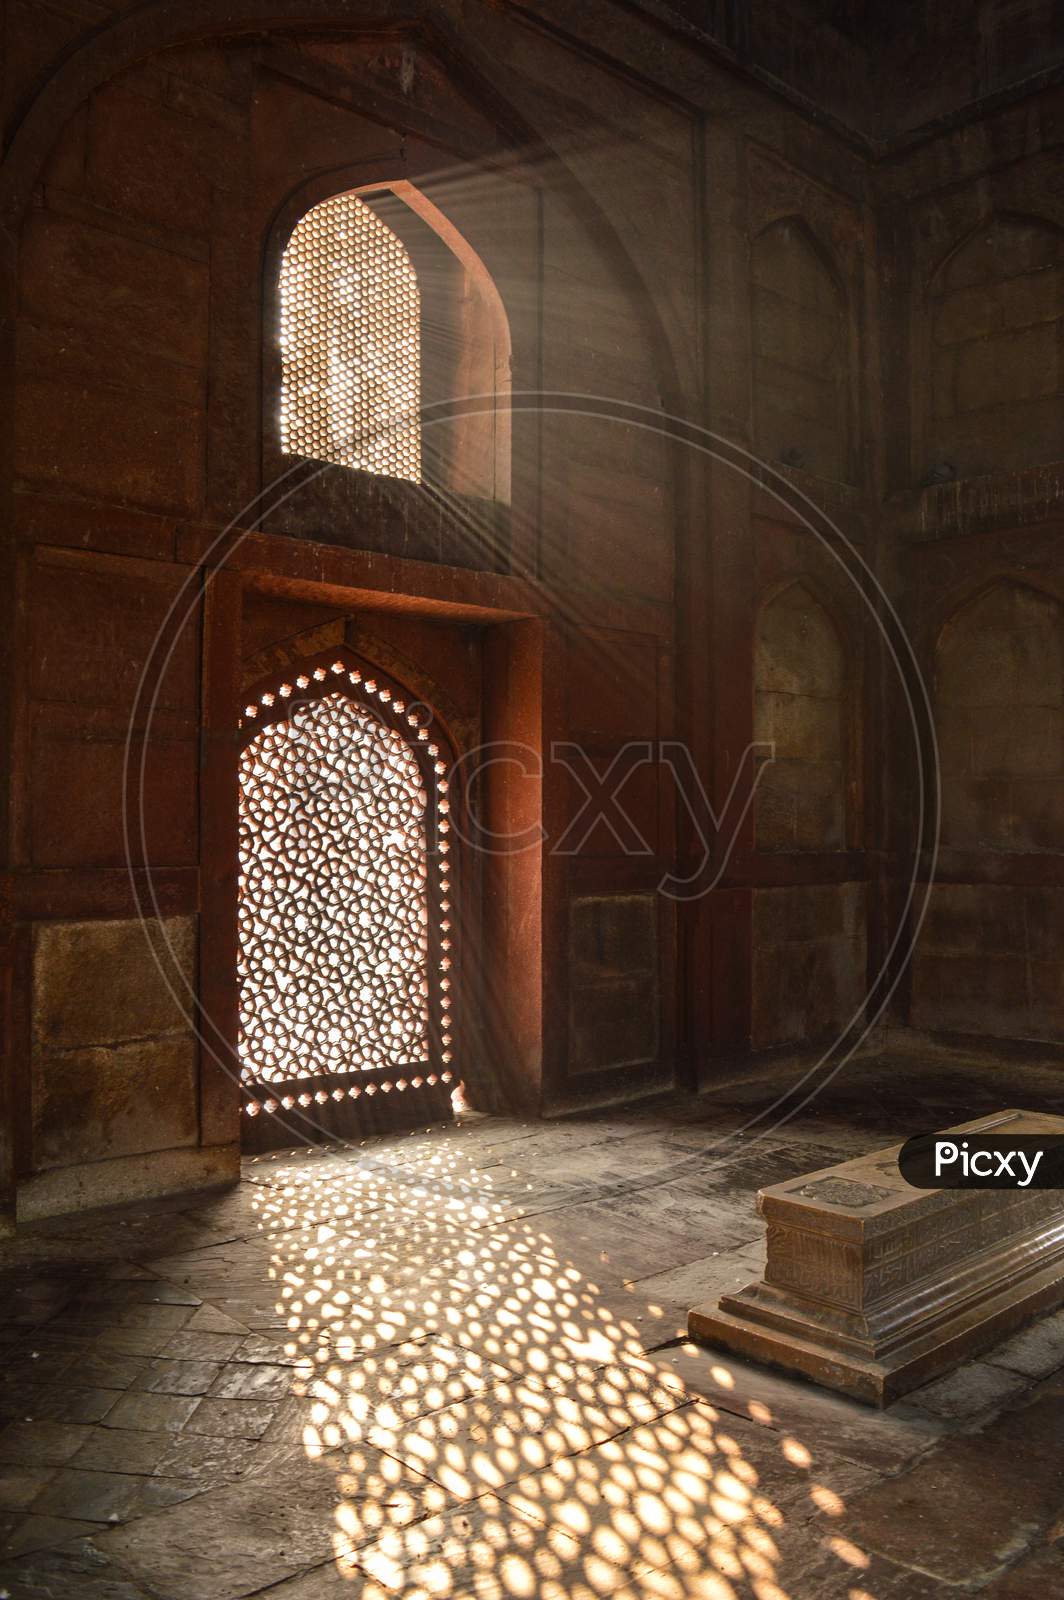 Sun Rays Create Dramatic Light And Shadow Inside Of The Humayun Tomb Memorial At Winter Foggy Morning.